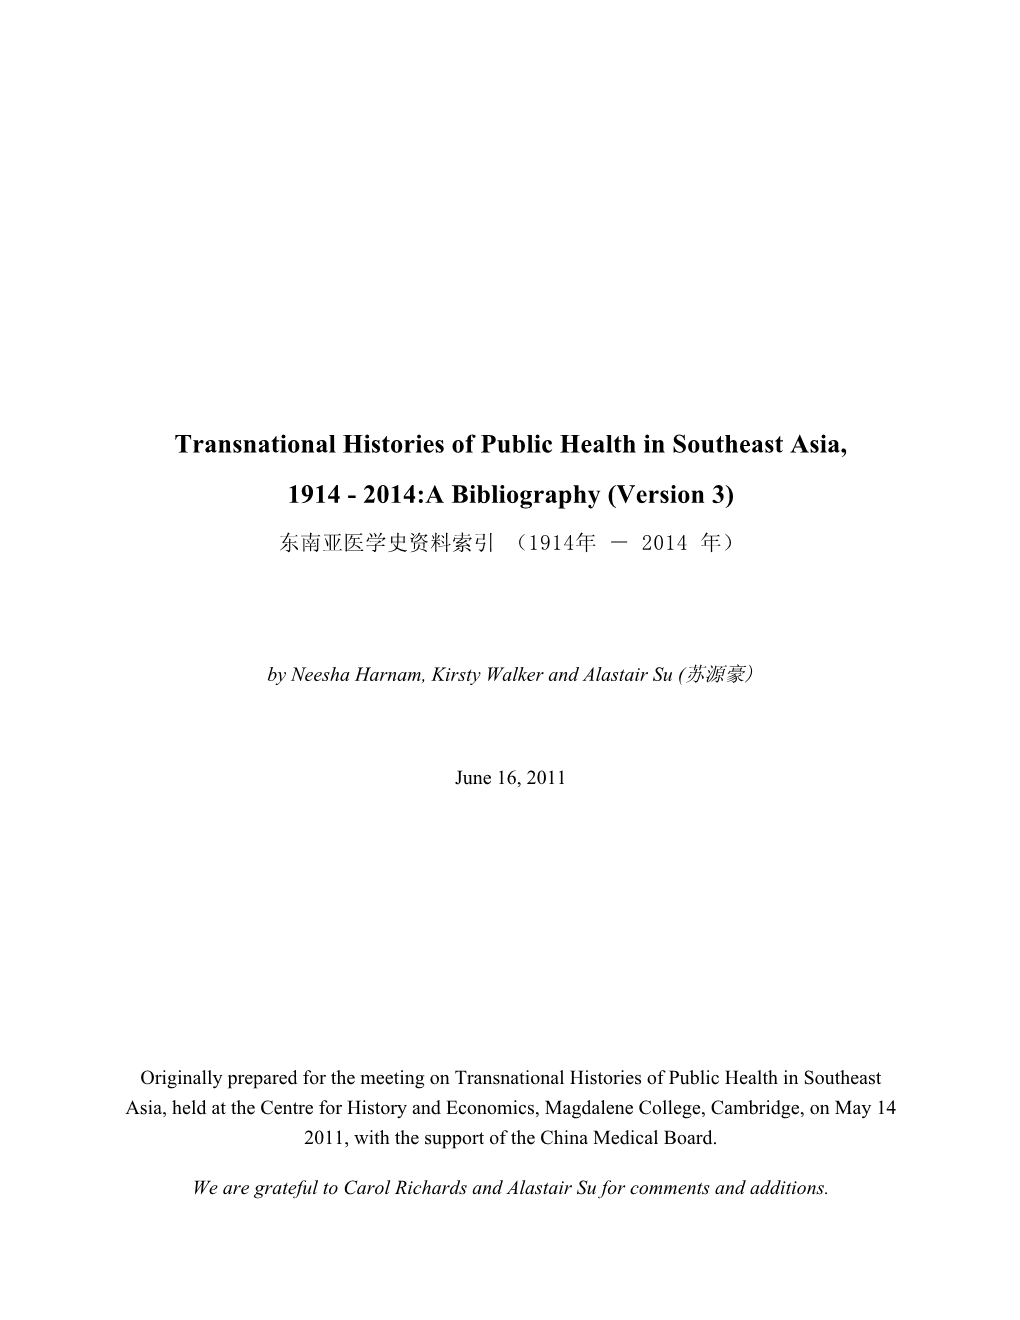 Transnational Histories of Public Health in Southeast Asia, 1914 - 2014:A Bibliography (Version 3)